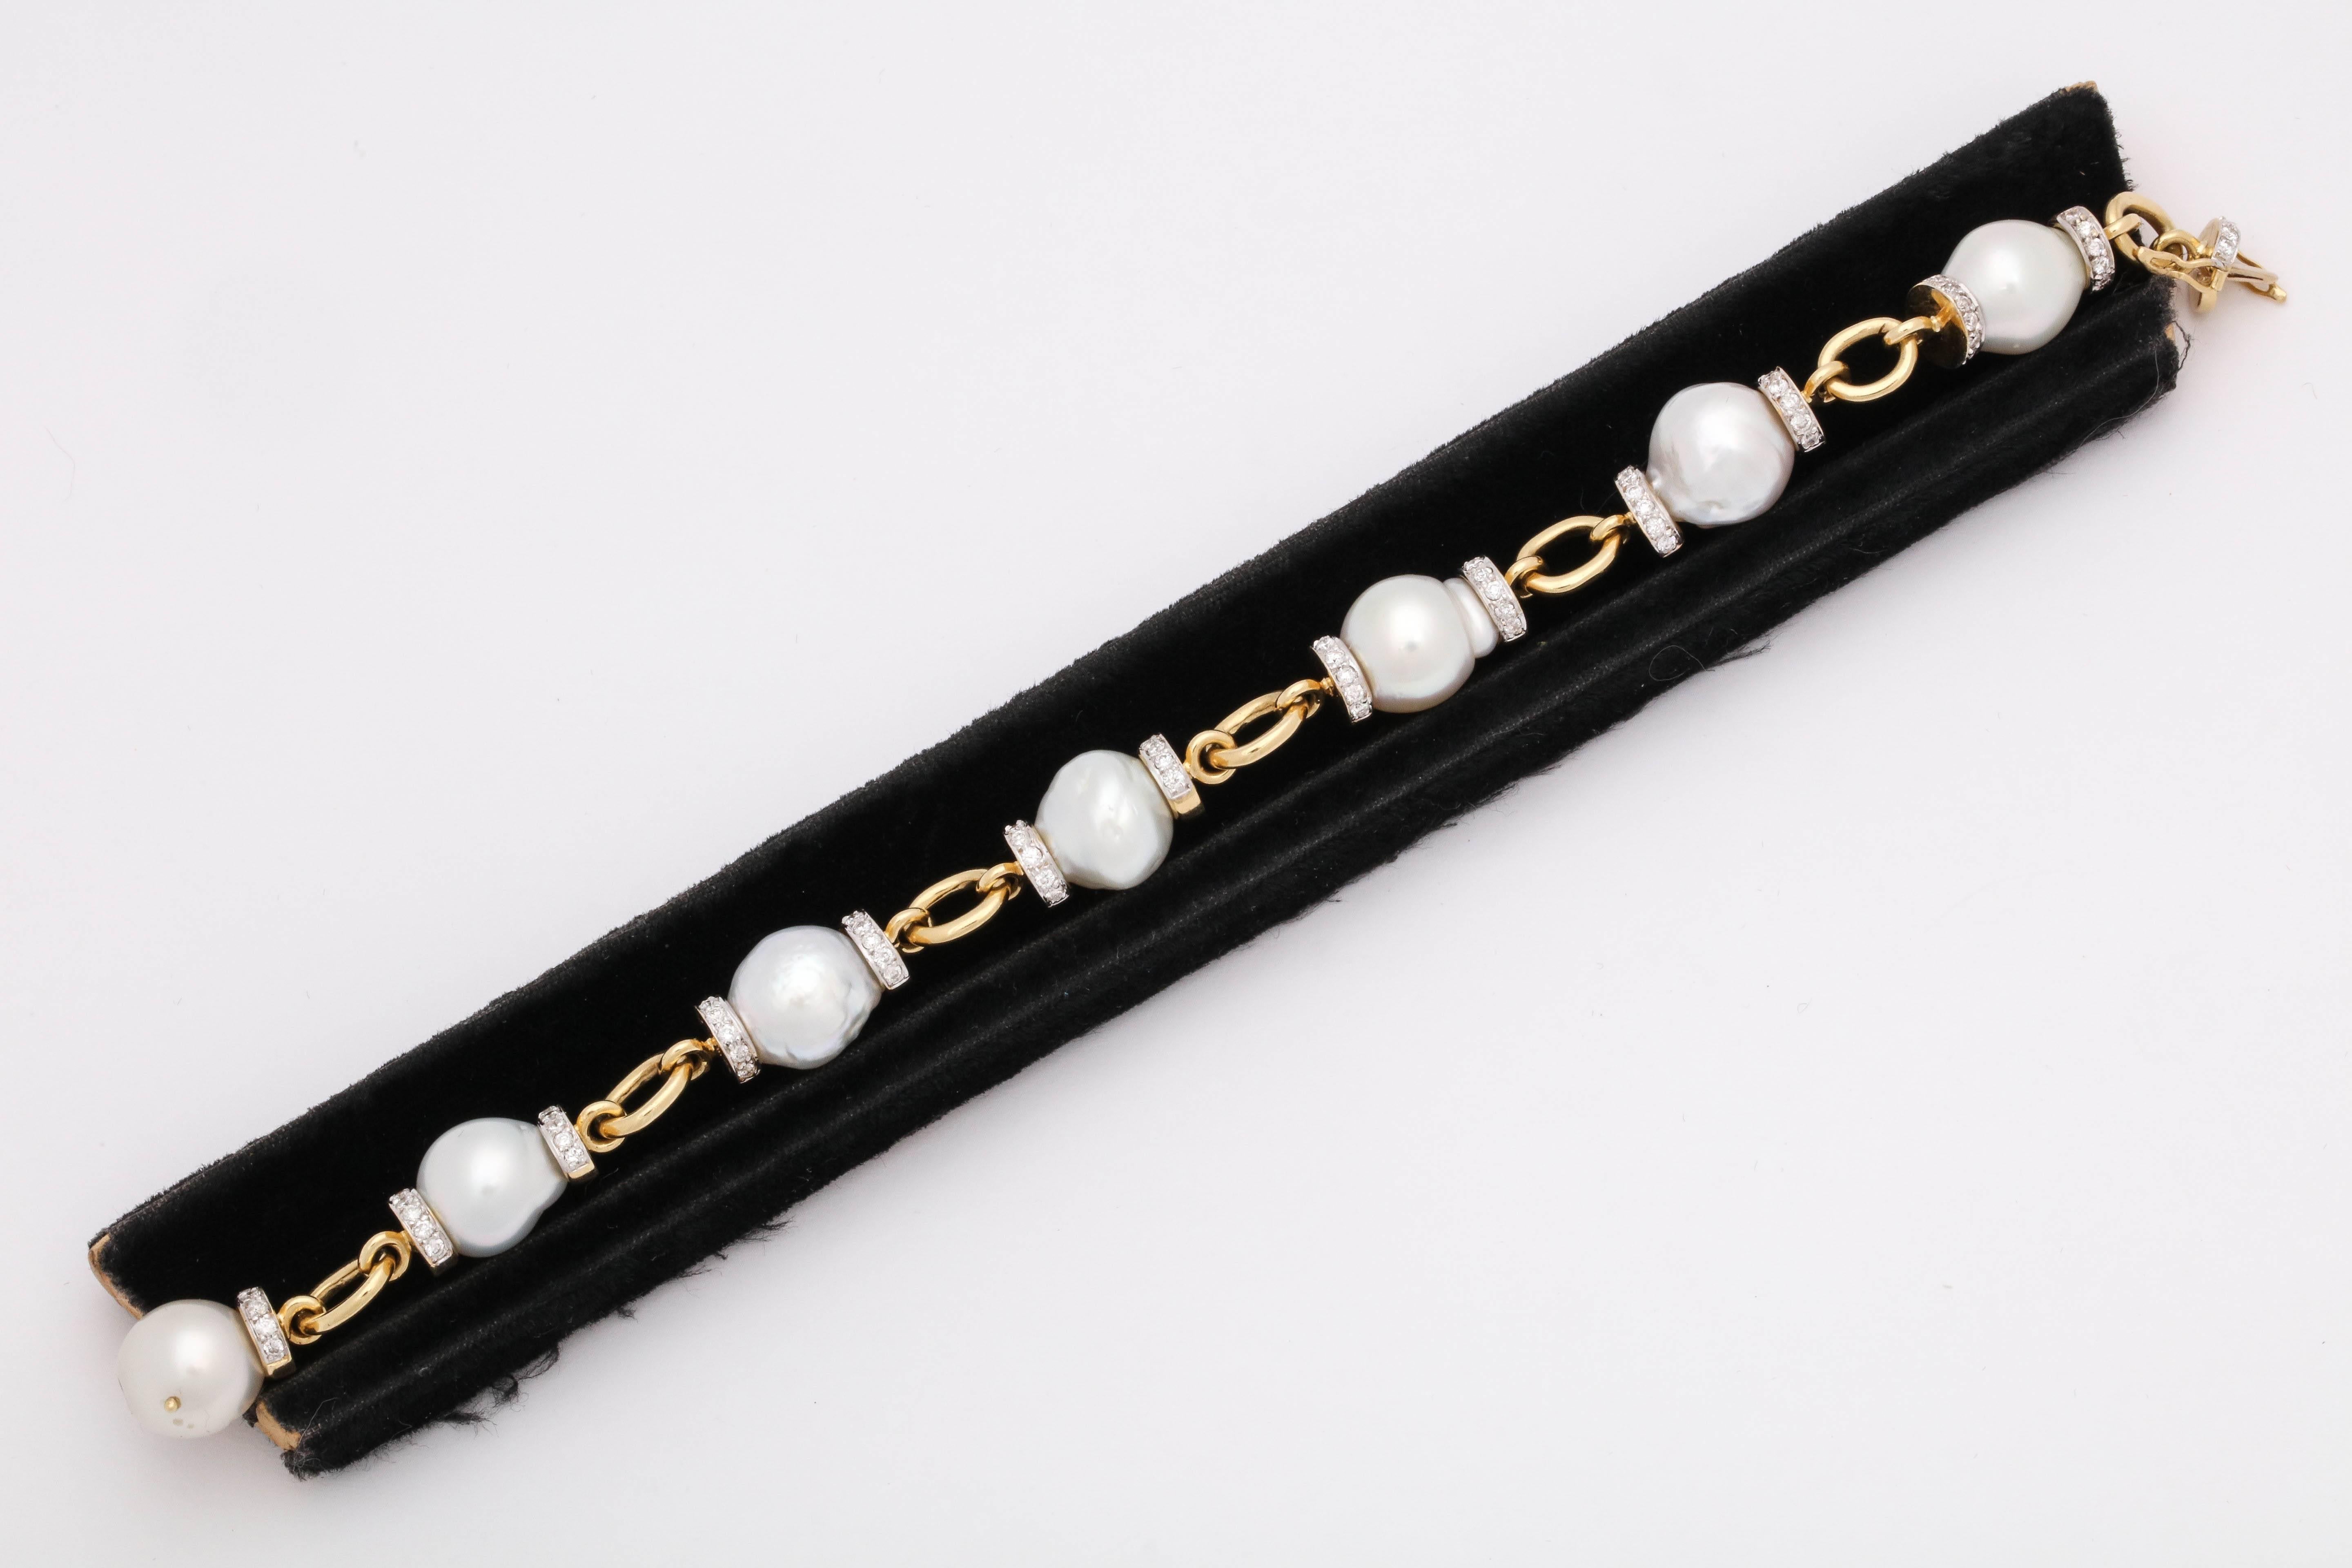 One Ladies Fancy South Sea Baroque Pearl With Diamond Link Bracelet Created In 18kt Yellow Gold. Composed Of Seven LargeSouth Sea Baroque Pearls Measuring Approximately 11Mm Each This Link Bracelet Is Further Designed With Fourteen Diamond Rondelles